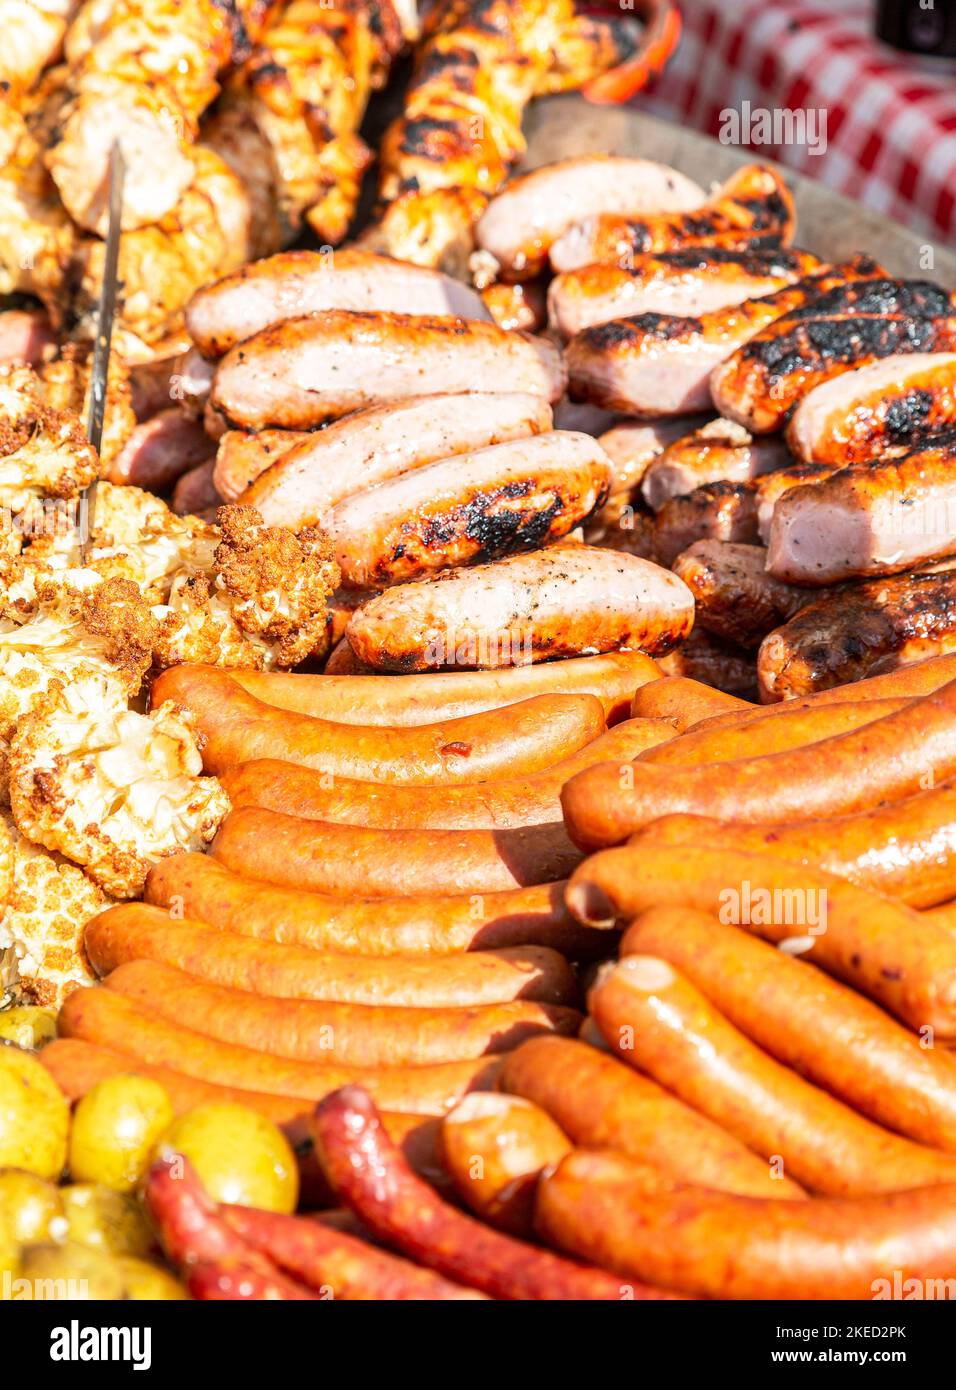 Delicious sausages from meat grilling over hot coals for a picnic lunch Stock Photo